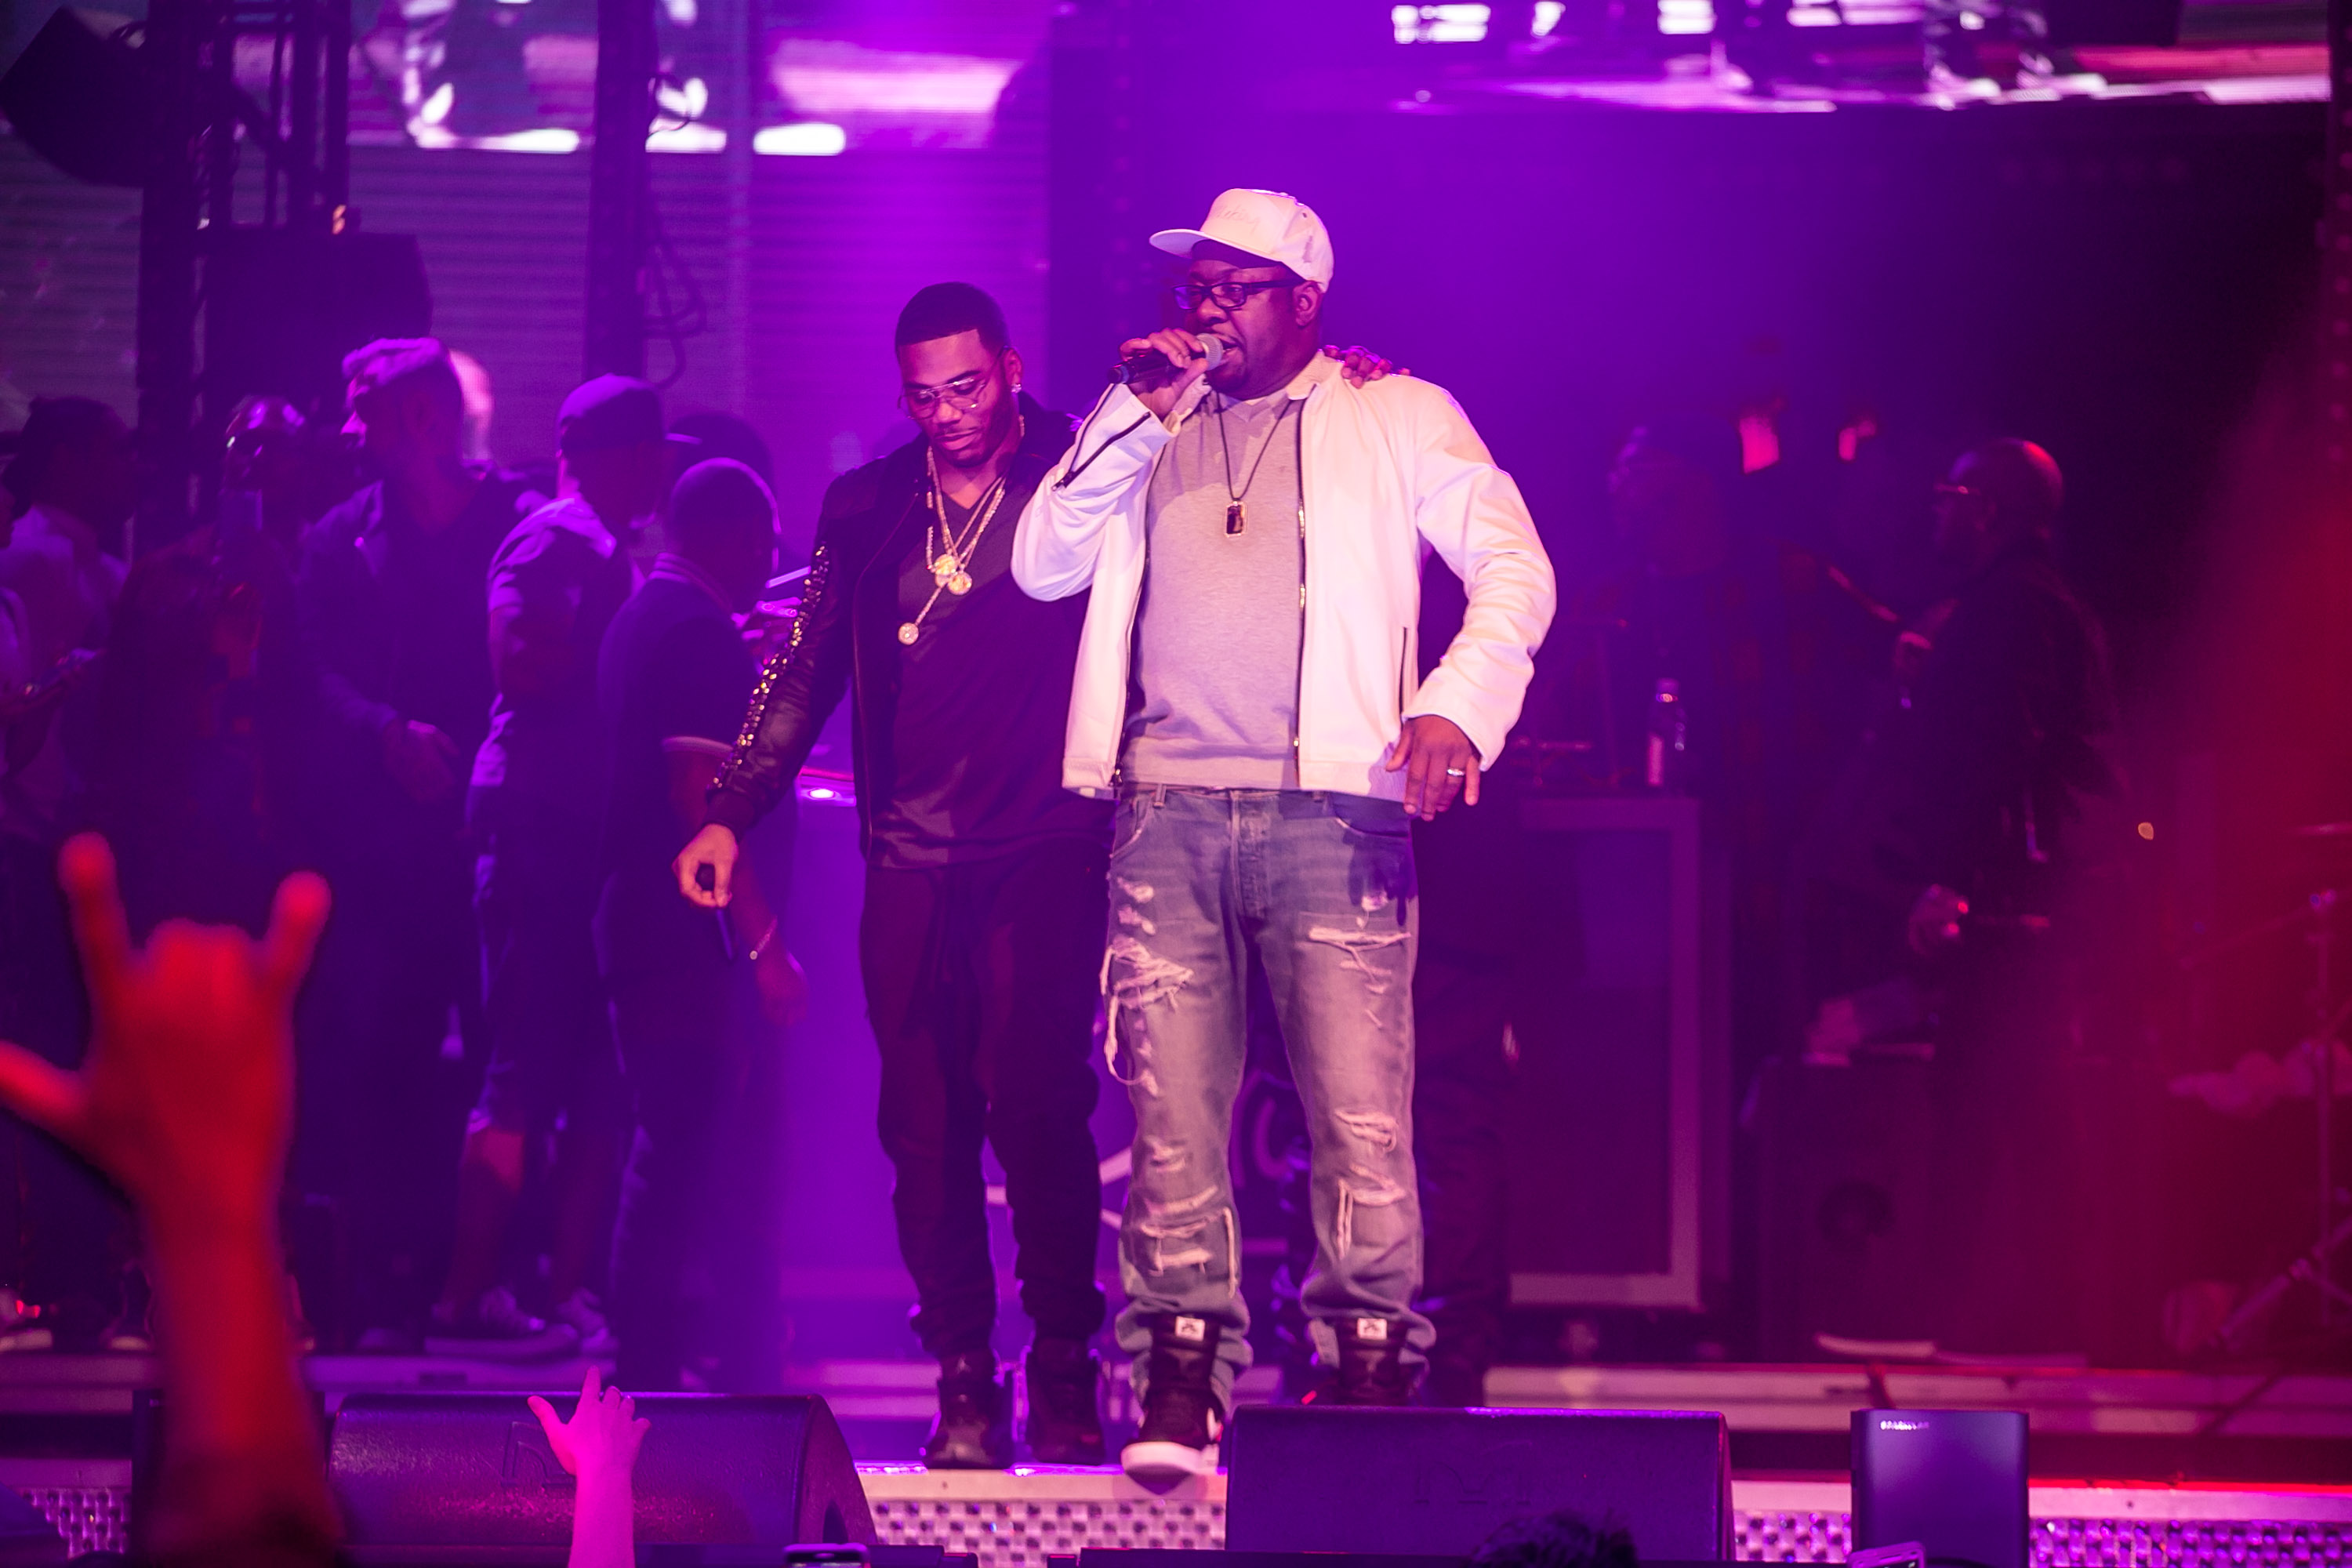 nelly-and-bobby-brown-at-drais-nightclub-las-vegas-11-4-16_3_credit-andrew-dangtony-tran-photography